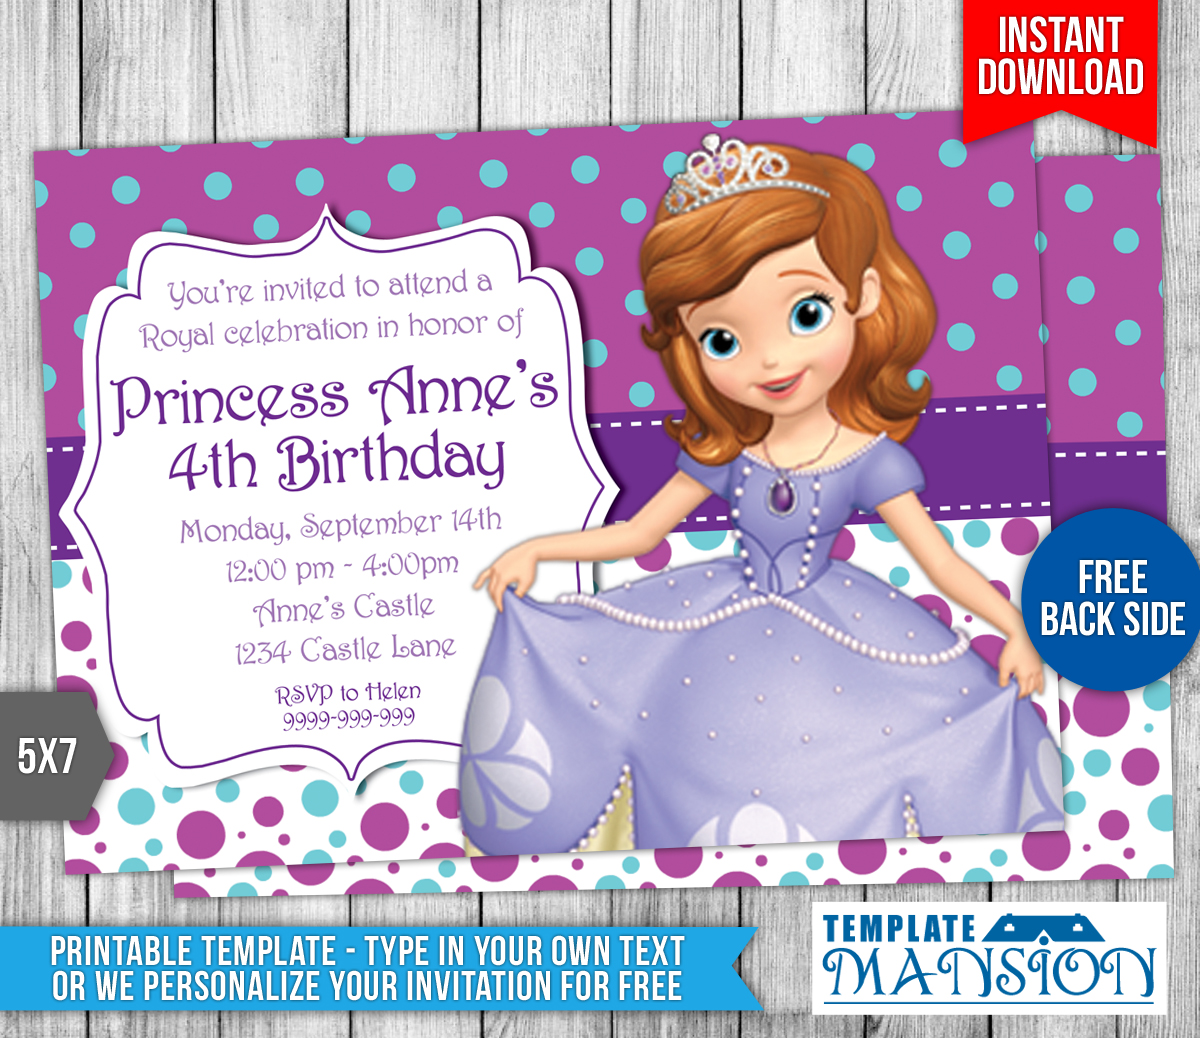 birthday-templates-for-sofia-the-first-download-sofia-the-first-theme